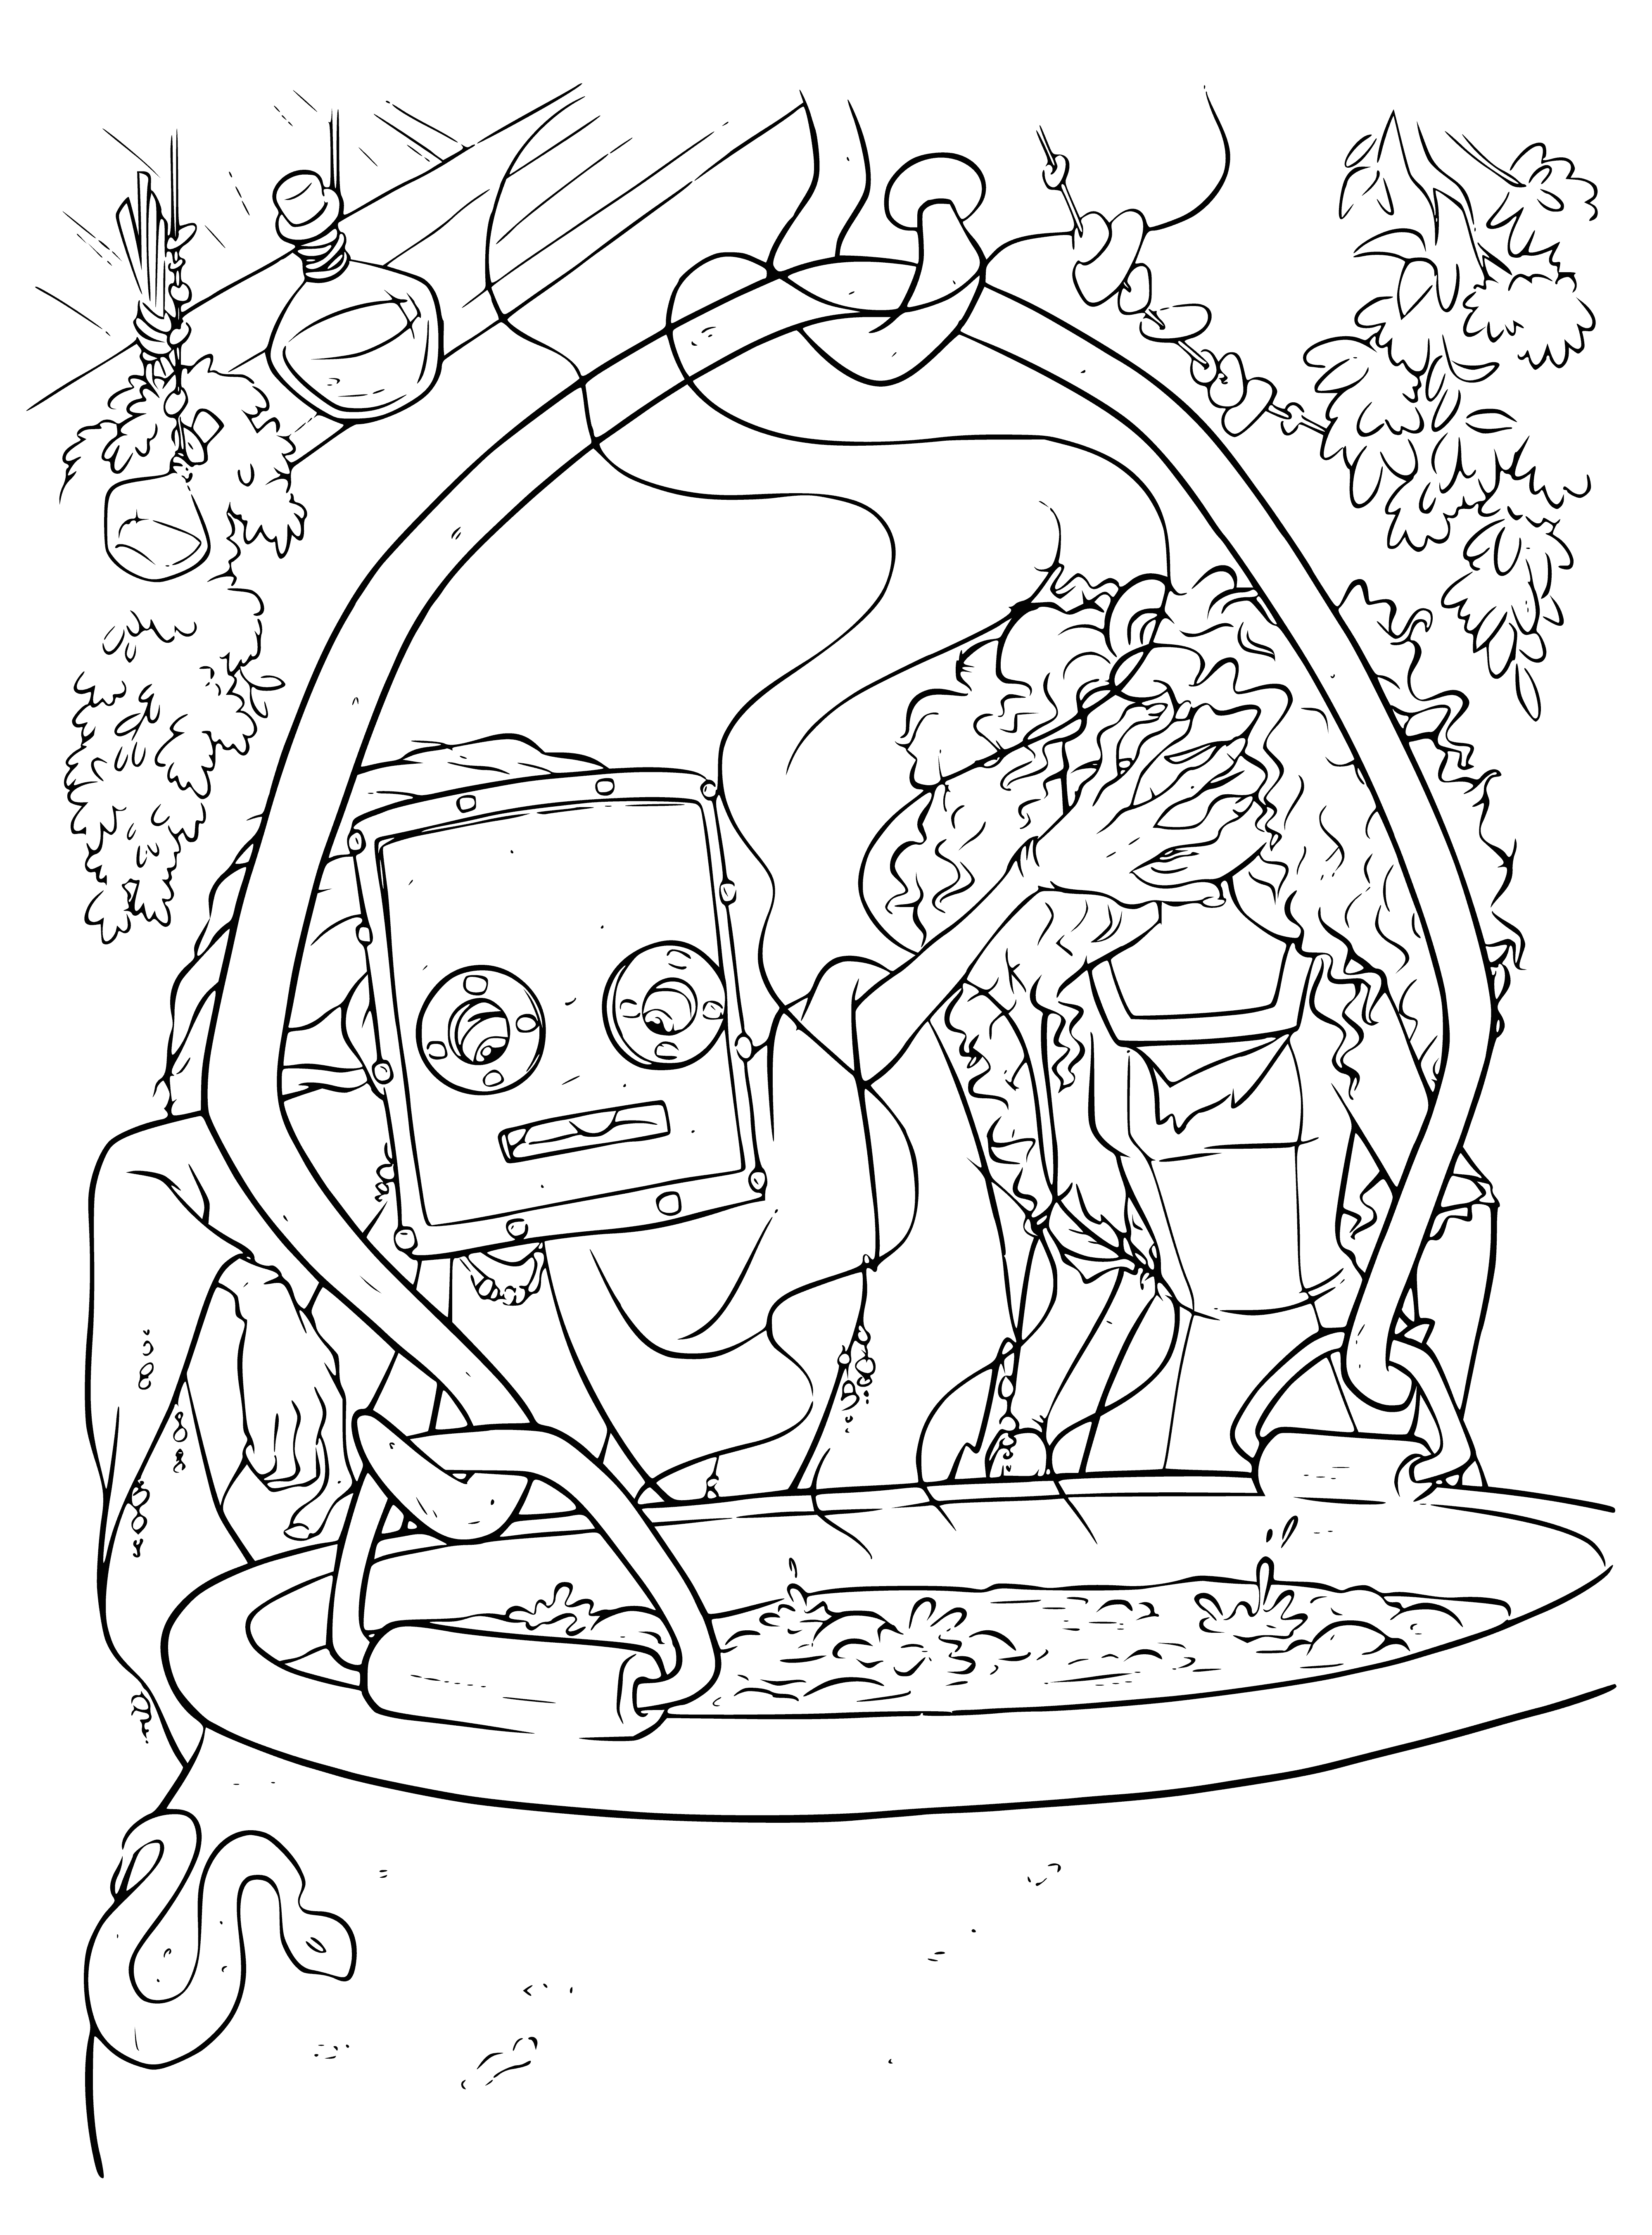 coloring page: Witch stirs black cauldron with black spoon, creating bubbling potion. She has dark hair, wearing black dress.